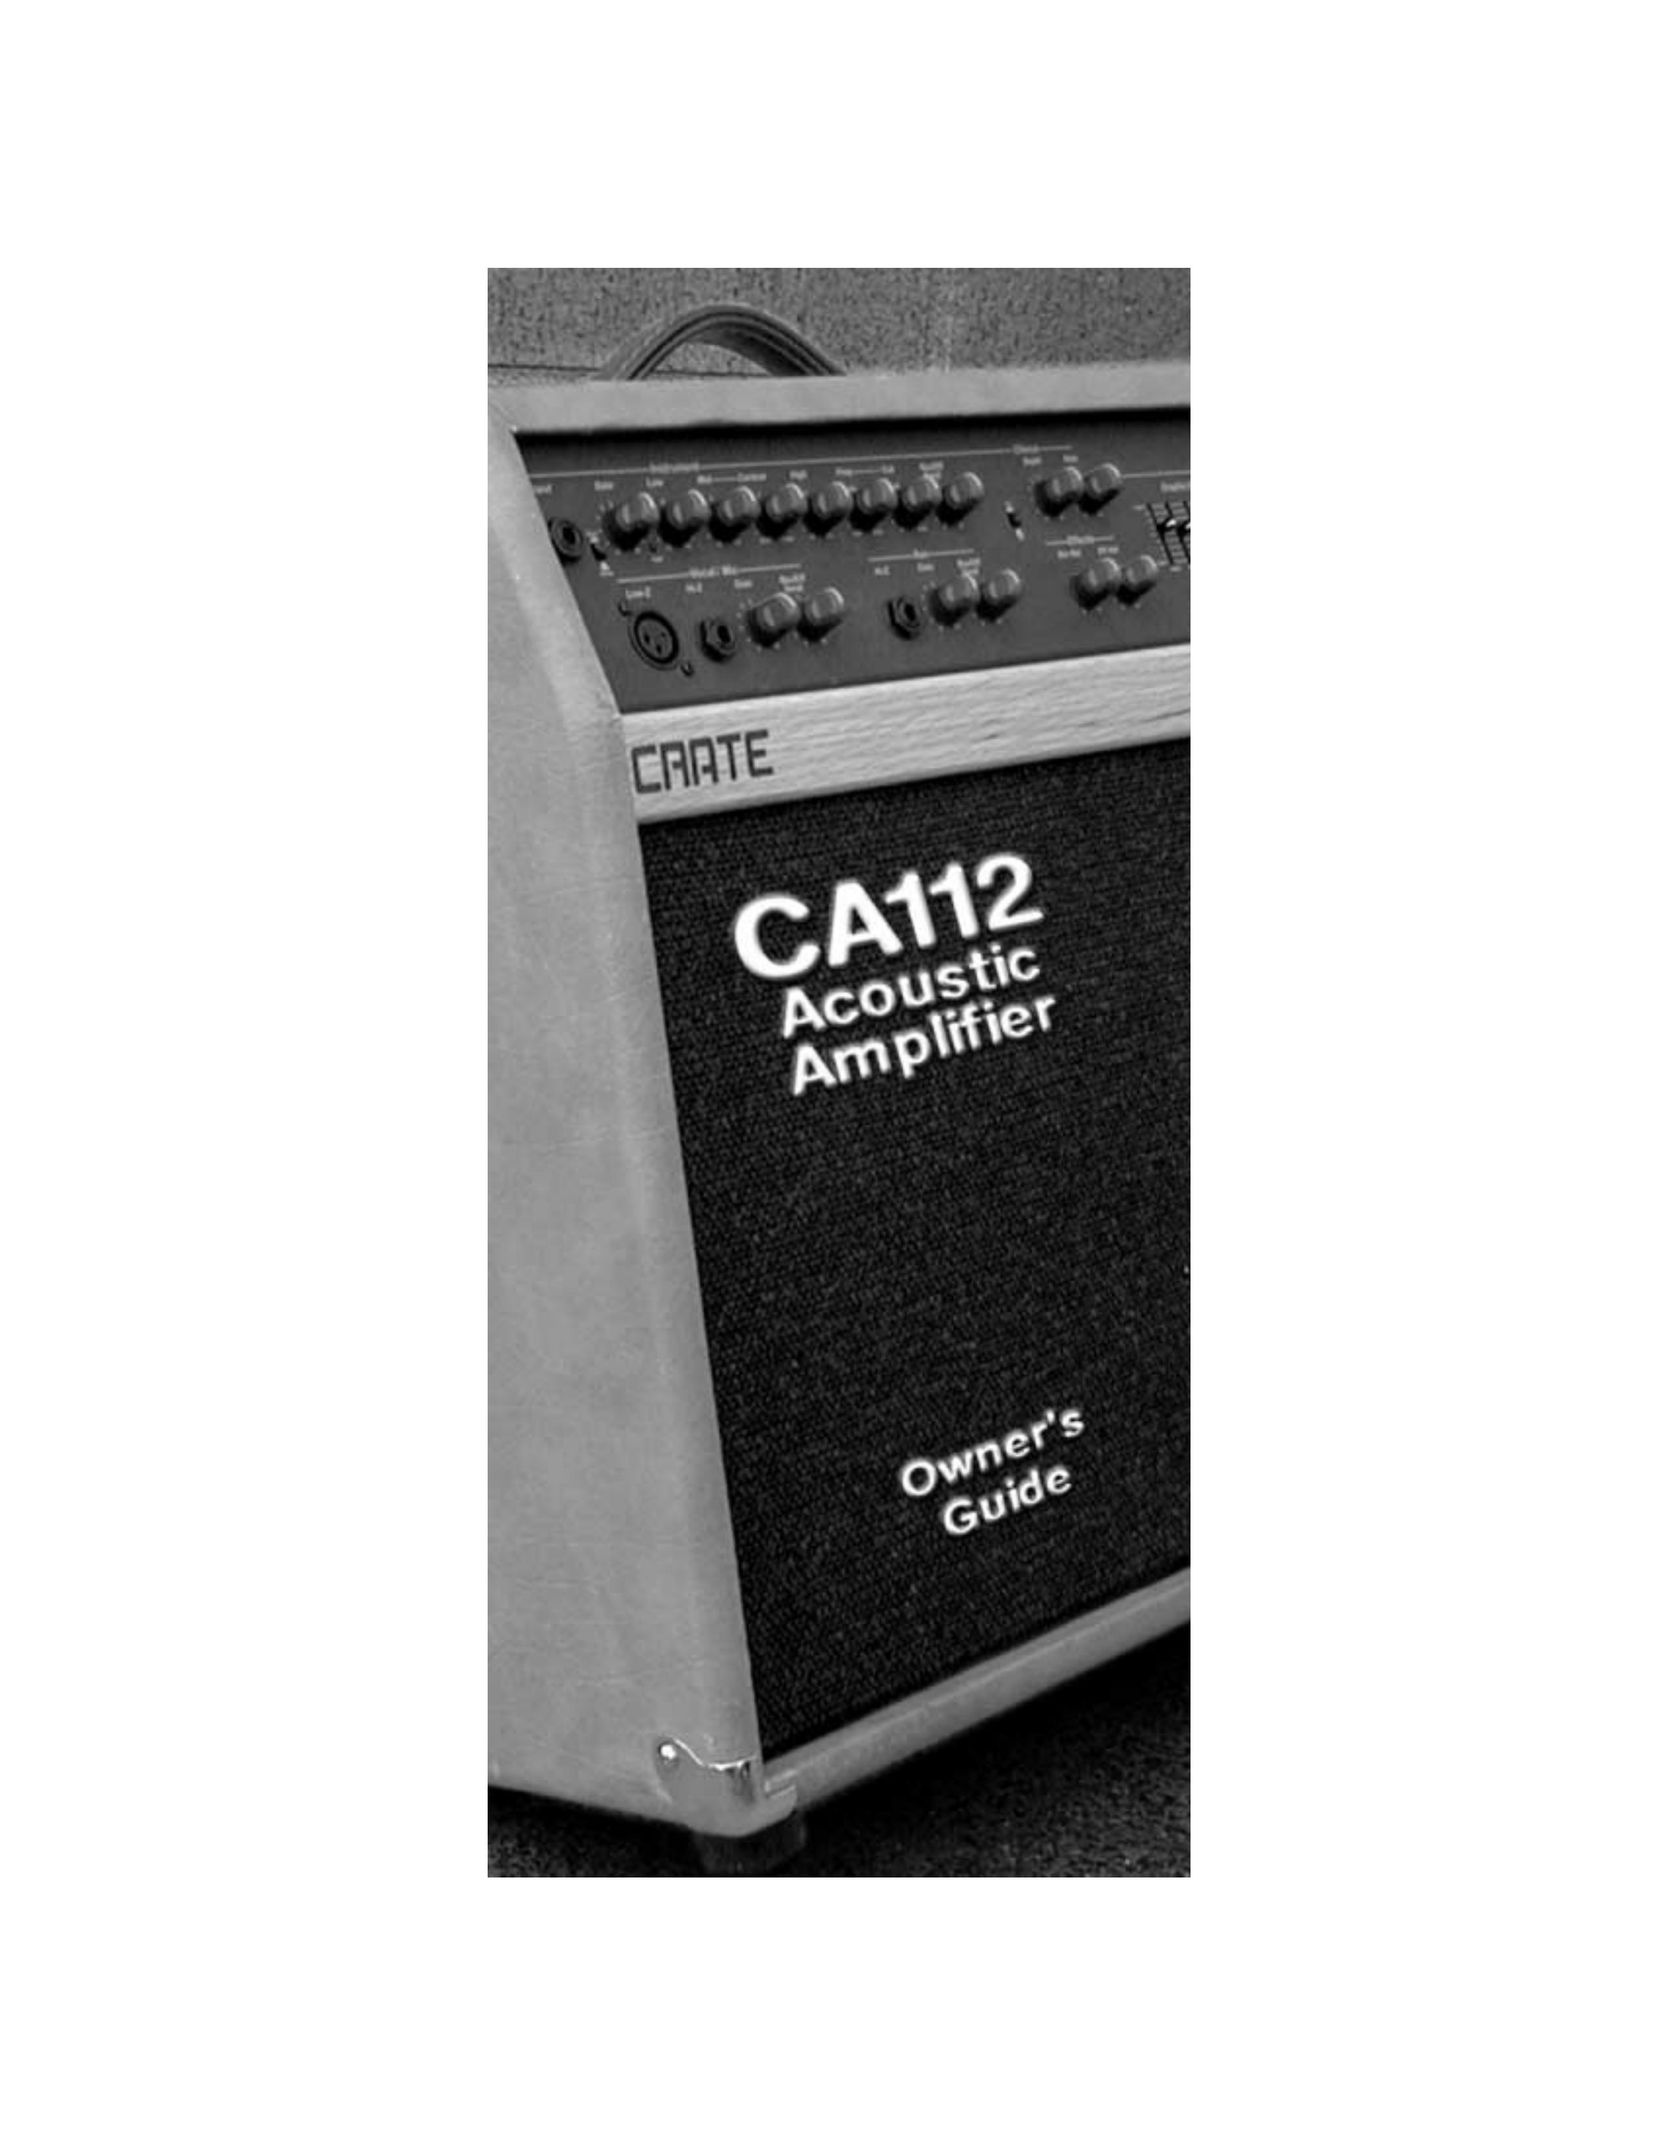 Crate Amplifiers CA112 Stereo Amplifier User Manual